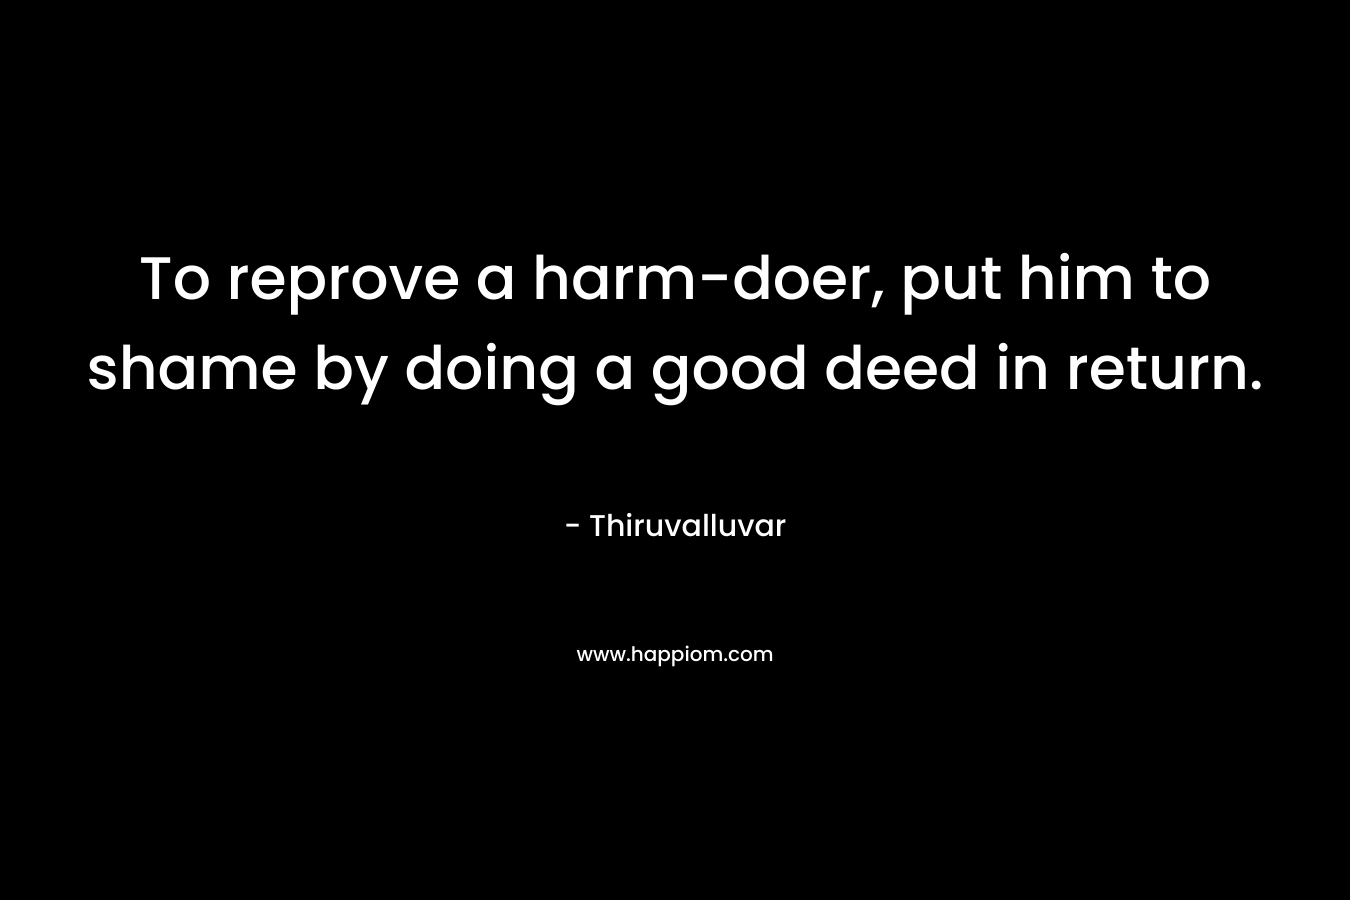 To reprove a harm-doer, put him to shame by doing a good deed in return.